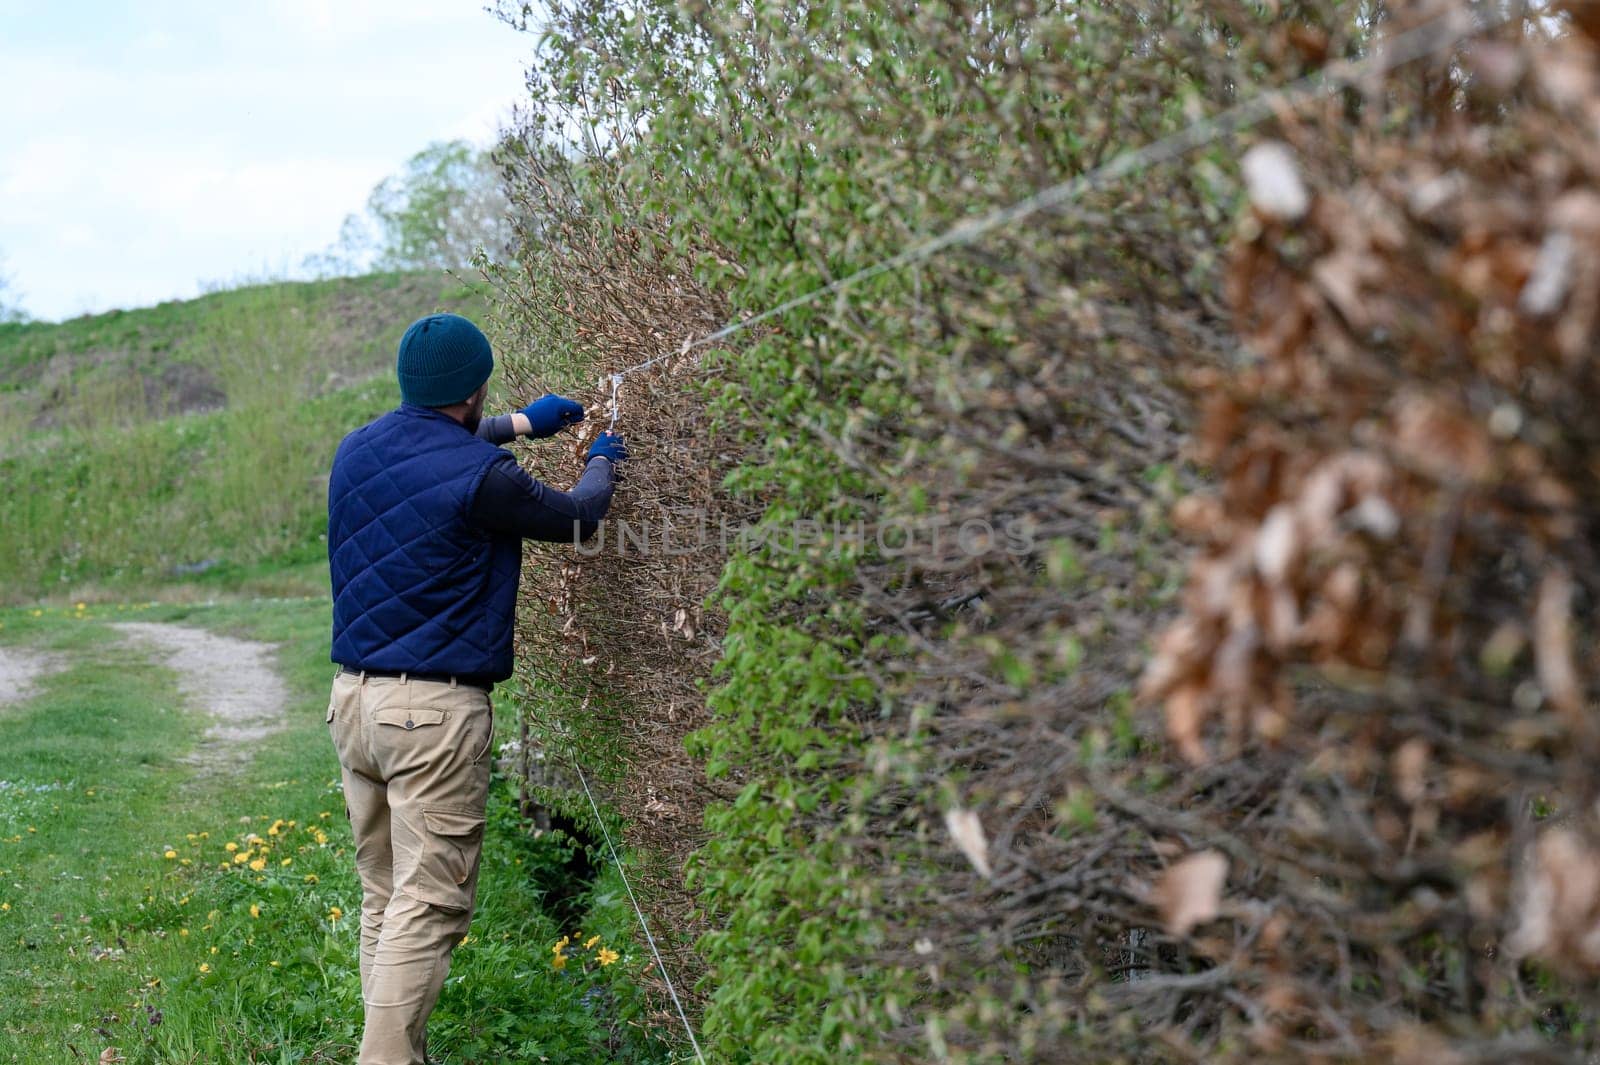 A male gardener trims a hedge in early spring, straightening it with taut laces, trimming the hedge with scissors.